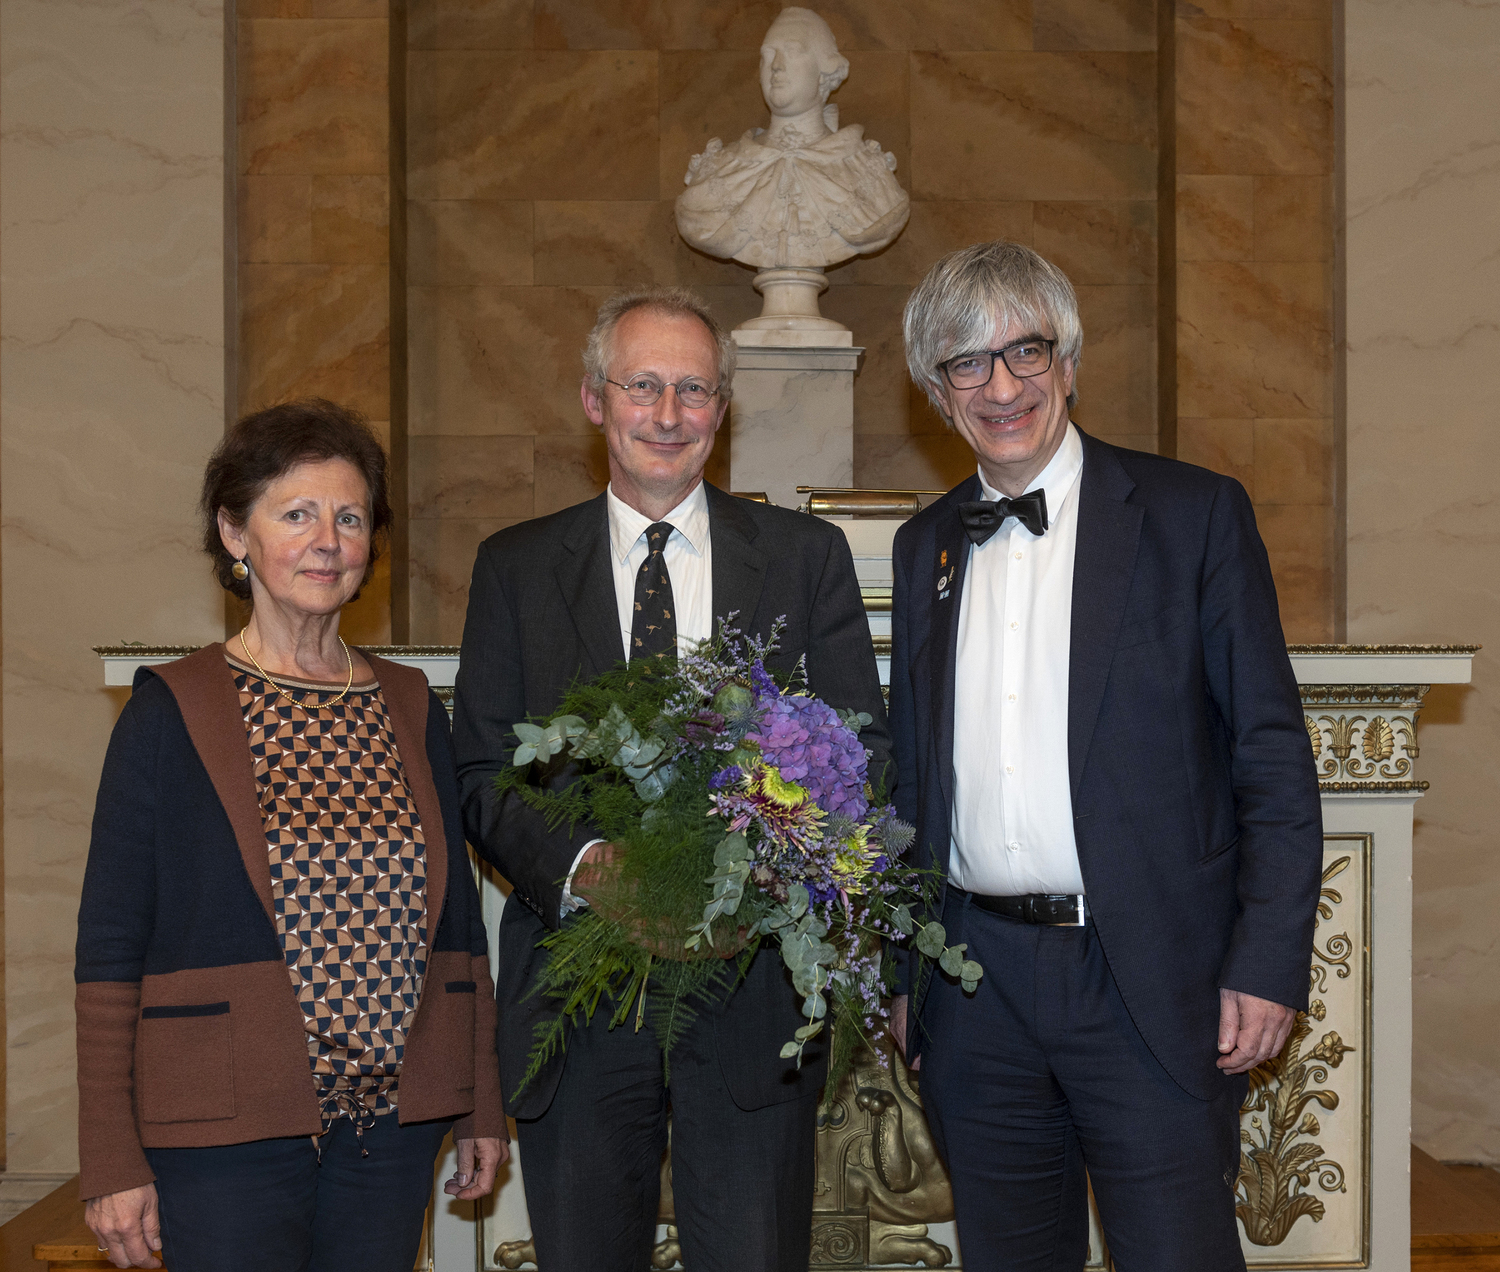 After the election: Professor Christian Ammer (centre) with Senate chair Professor Margarete Boos (left) and University President Professor Metin Tolan.